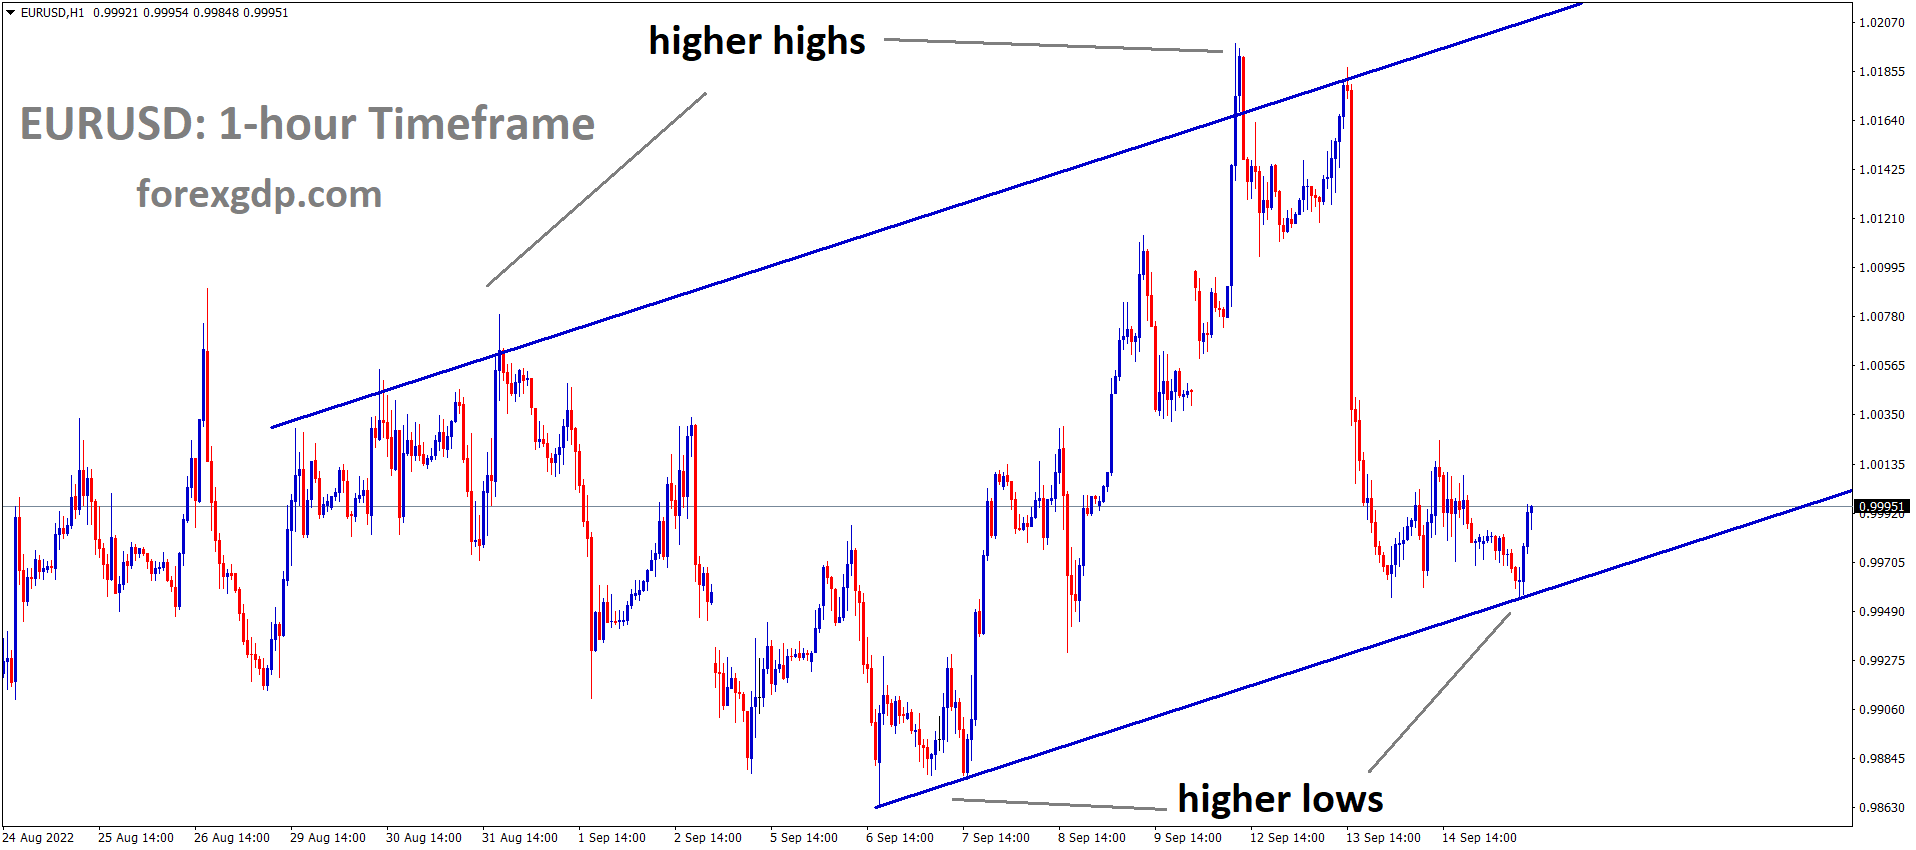 EURUSD is moving in an Ascending channel and the market has rebounded from the higher low area of the channel 2